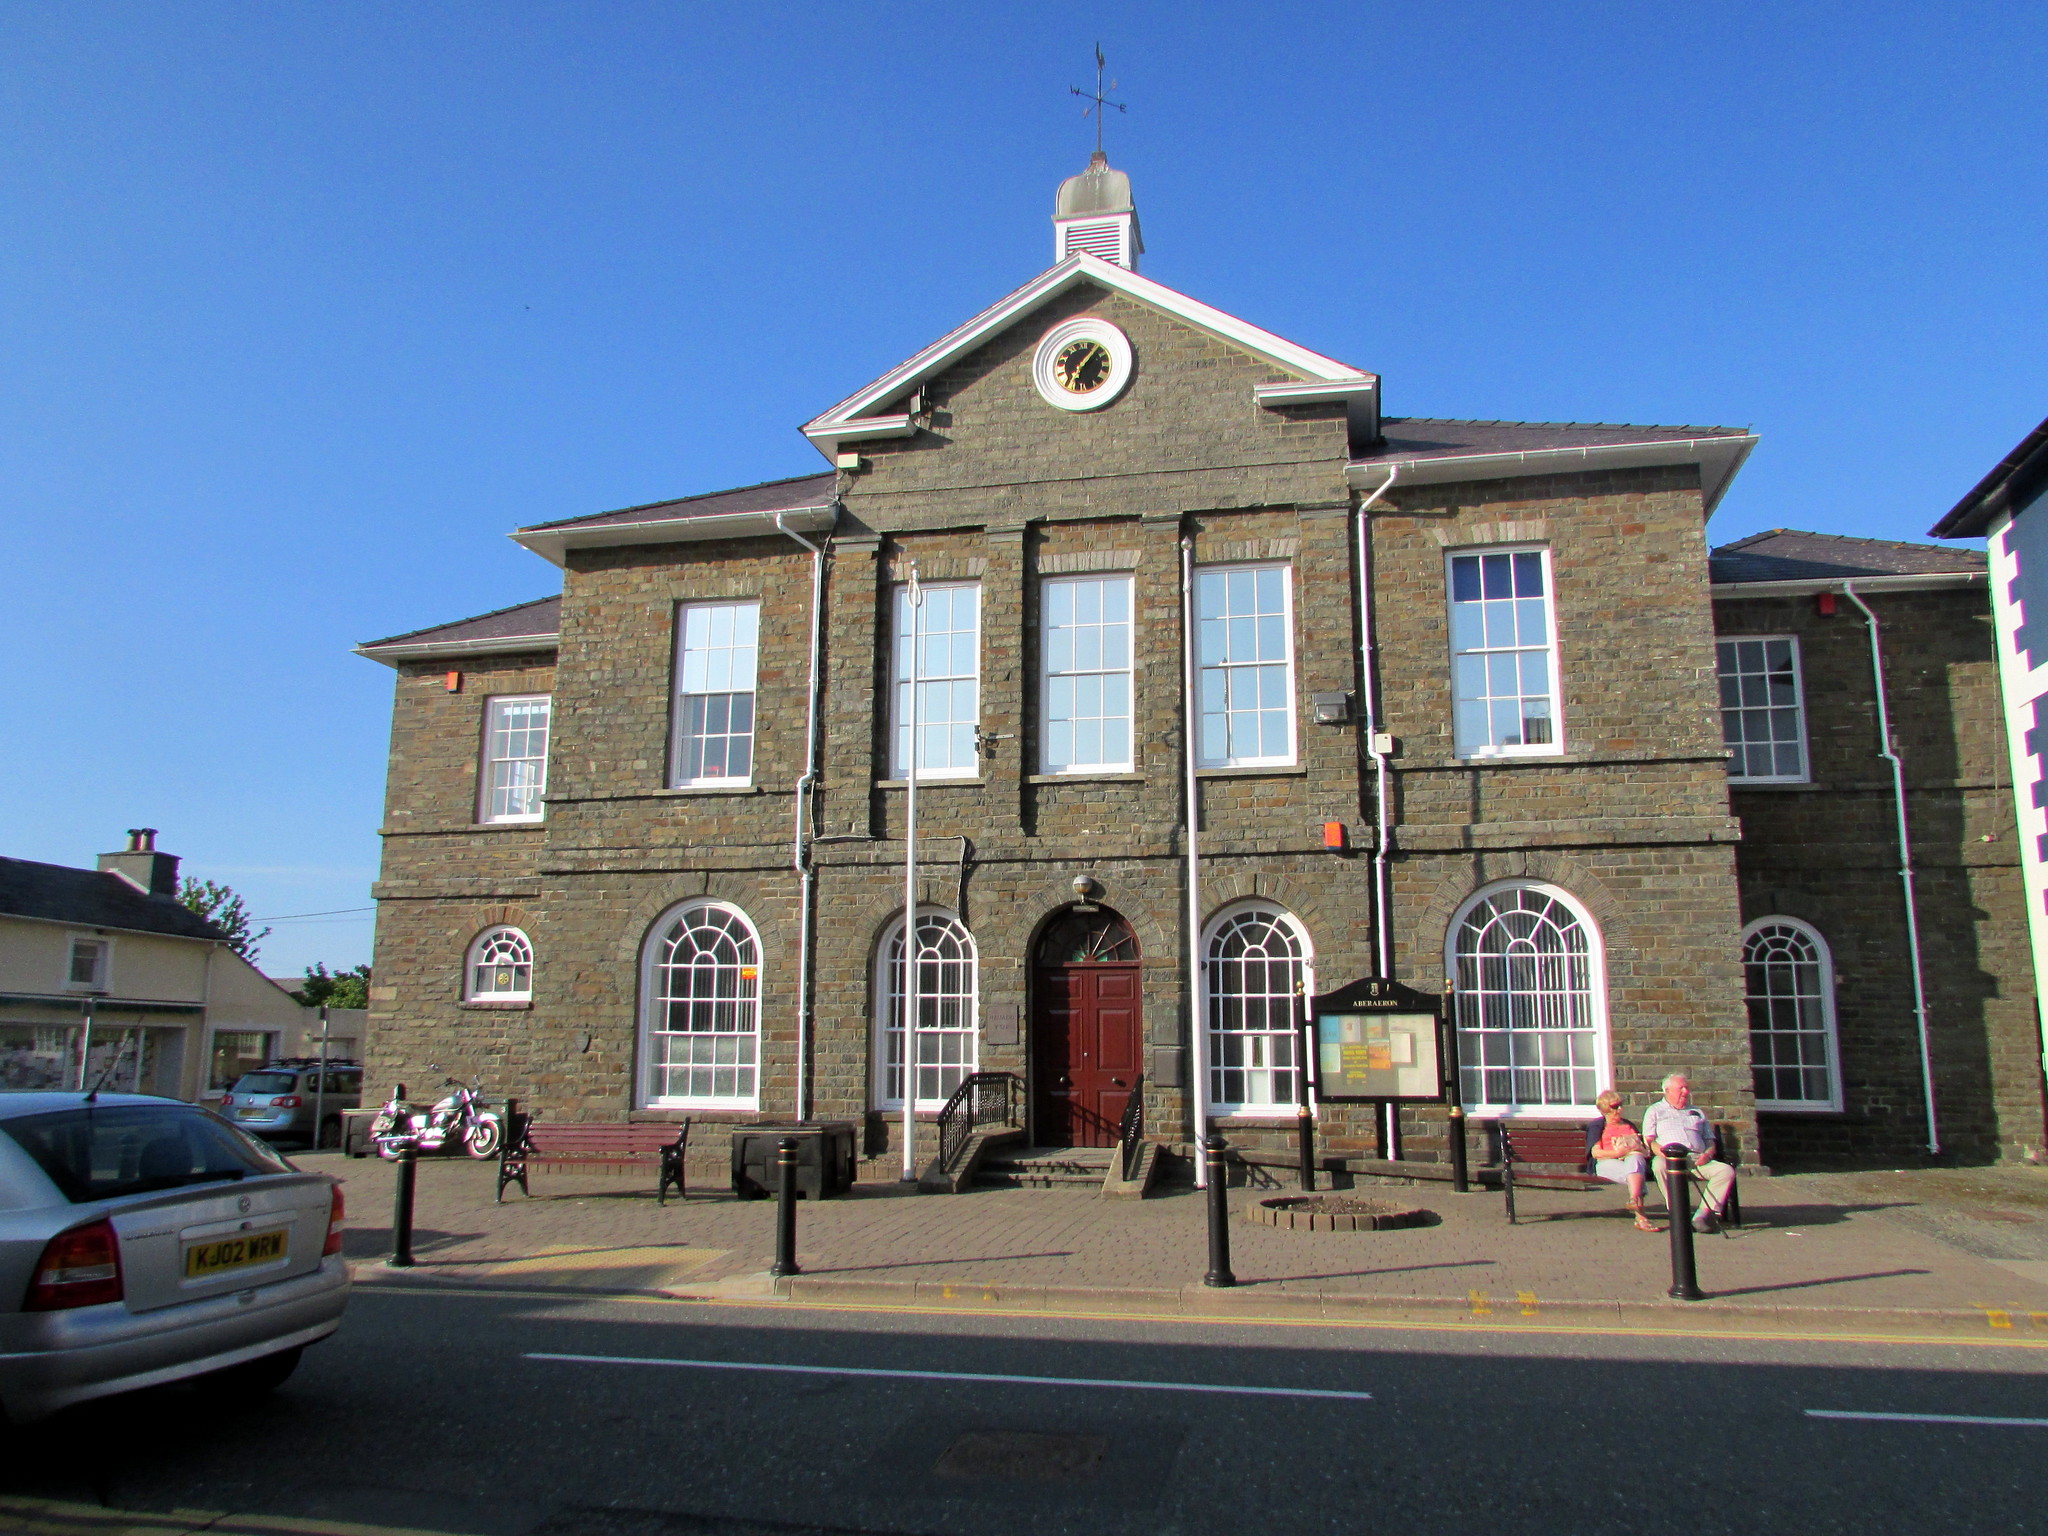 "Aberaeron Town Hall" by Reading Tom is licensed under CC BY 2.0. To view a copy of this license, visit https://creativecommons.org/licenses/by/2.0/?ref=openverse.